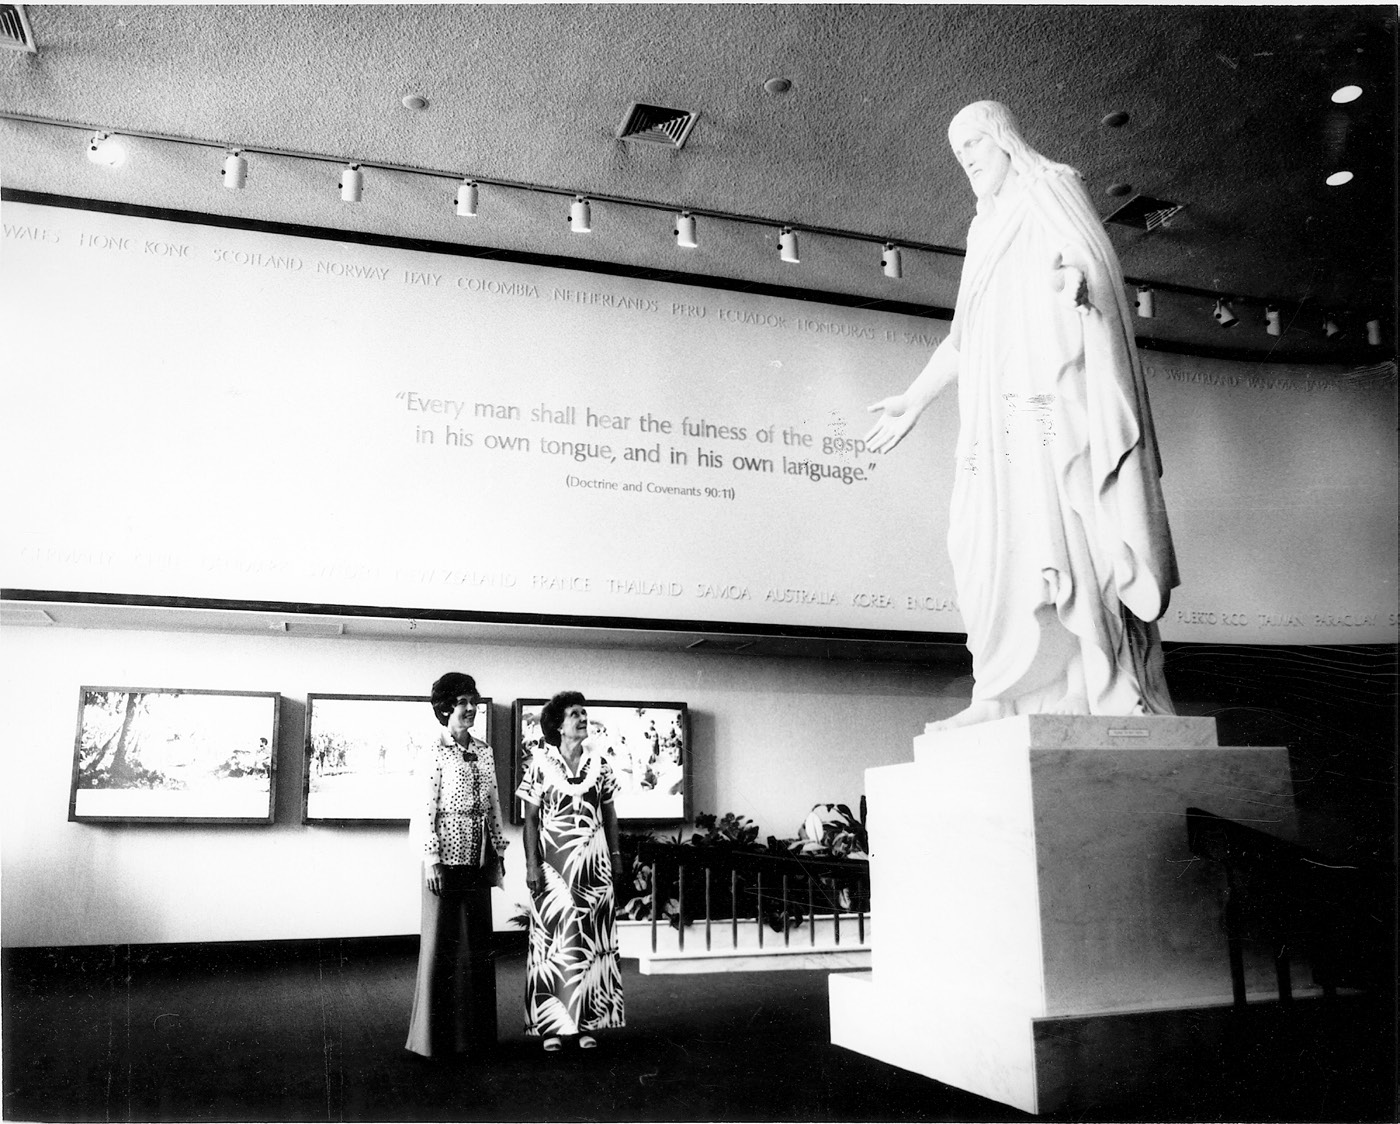 The 1979–80 expansion of the Hawaii Temple’s main visitors’ center included the addition of a Christus statue. Courtesy of BYU–Hawaii Archives.